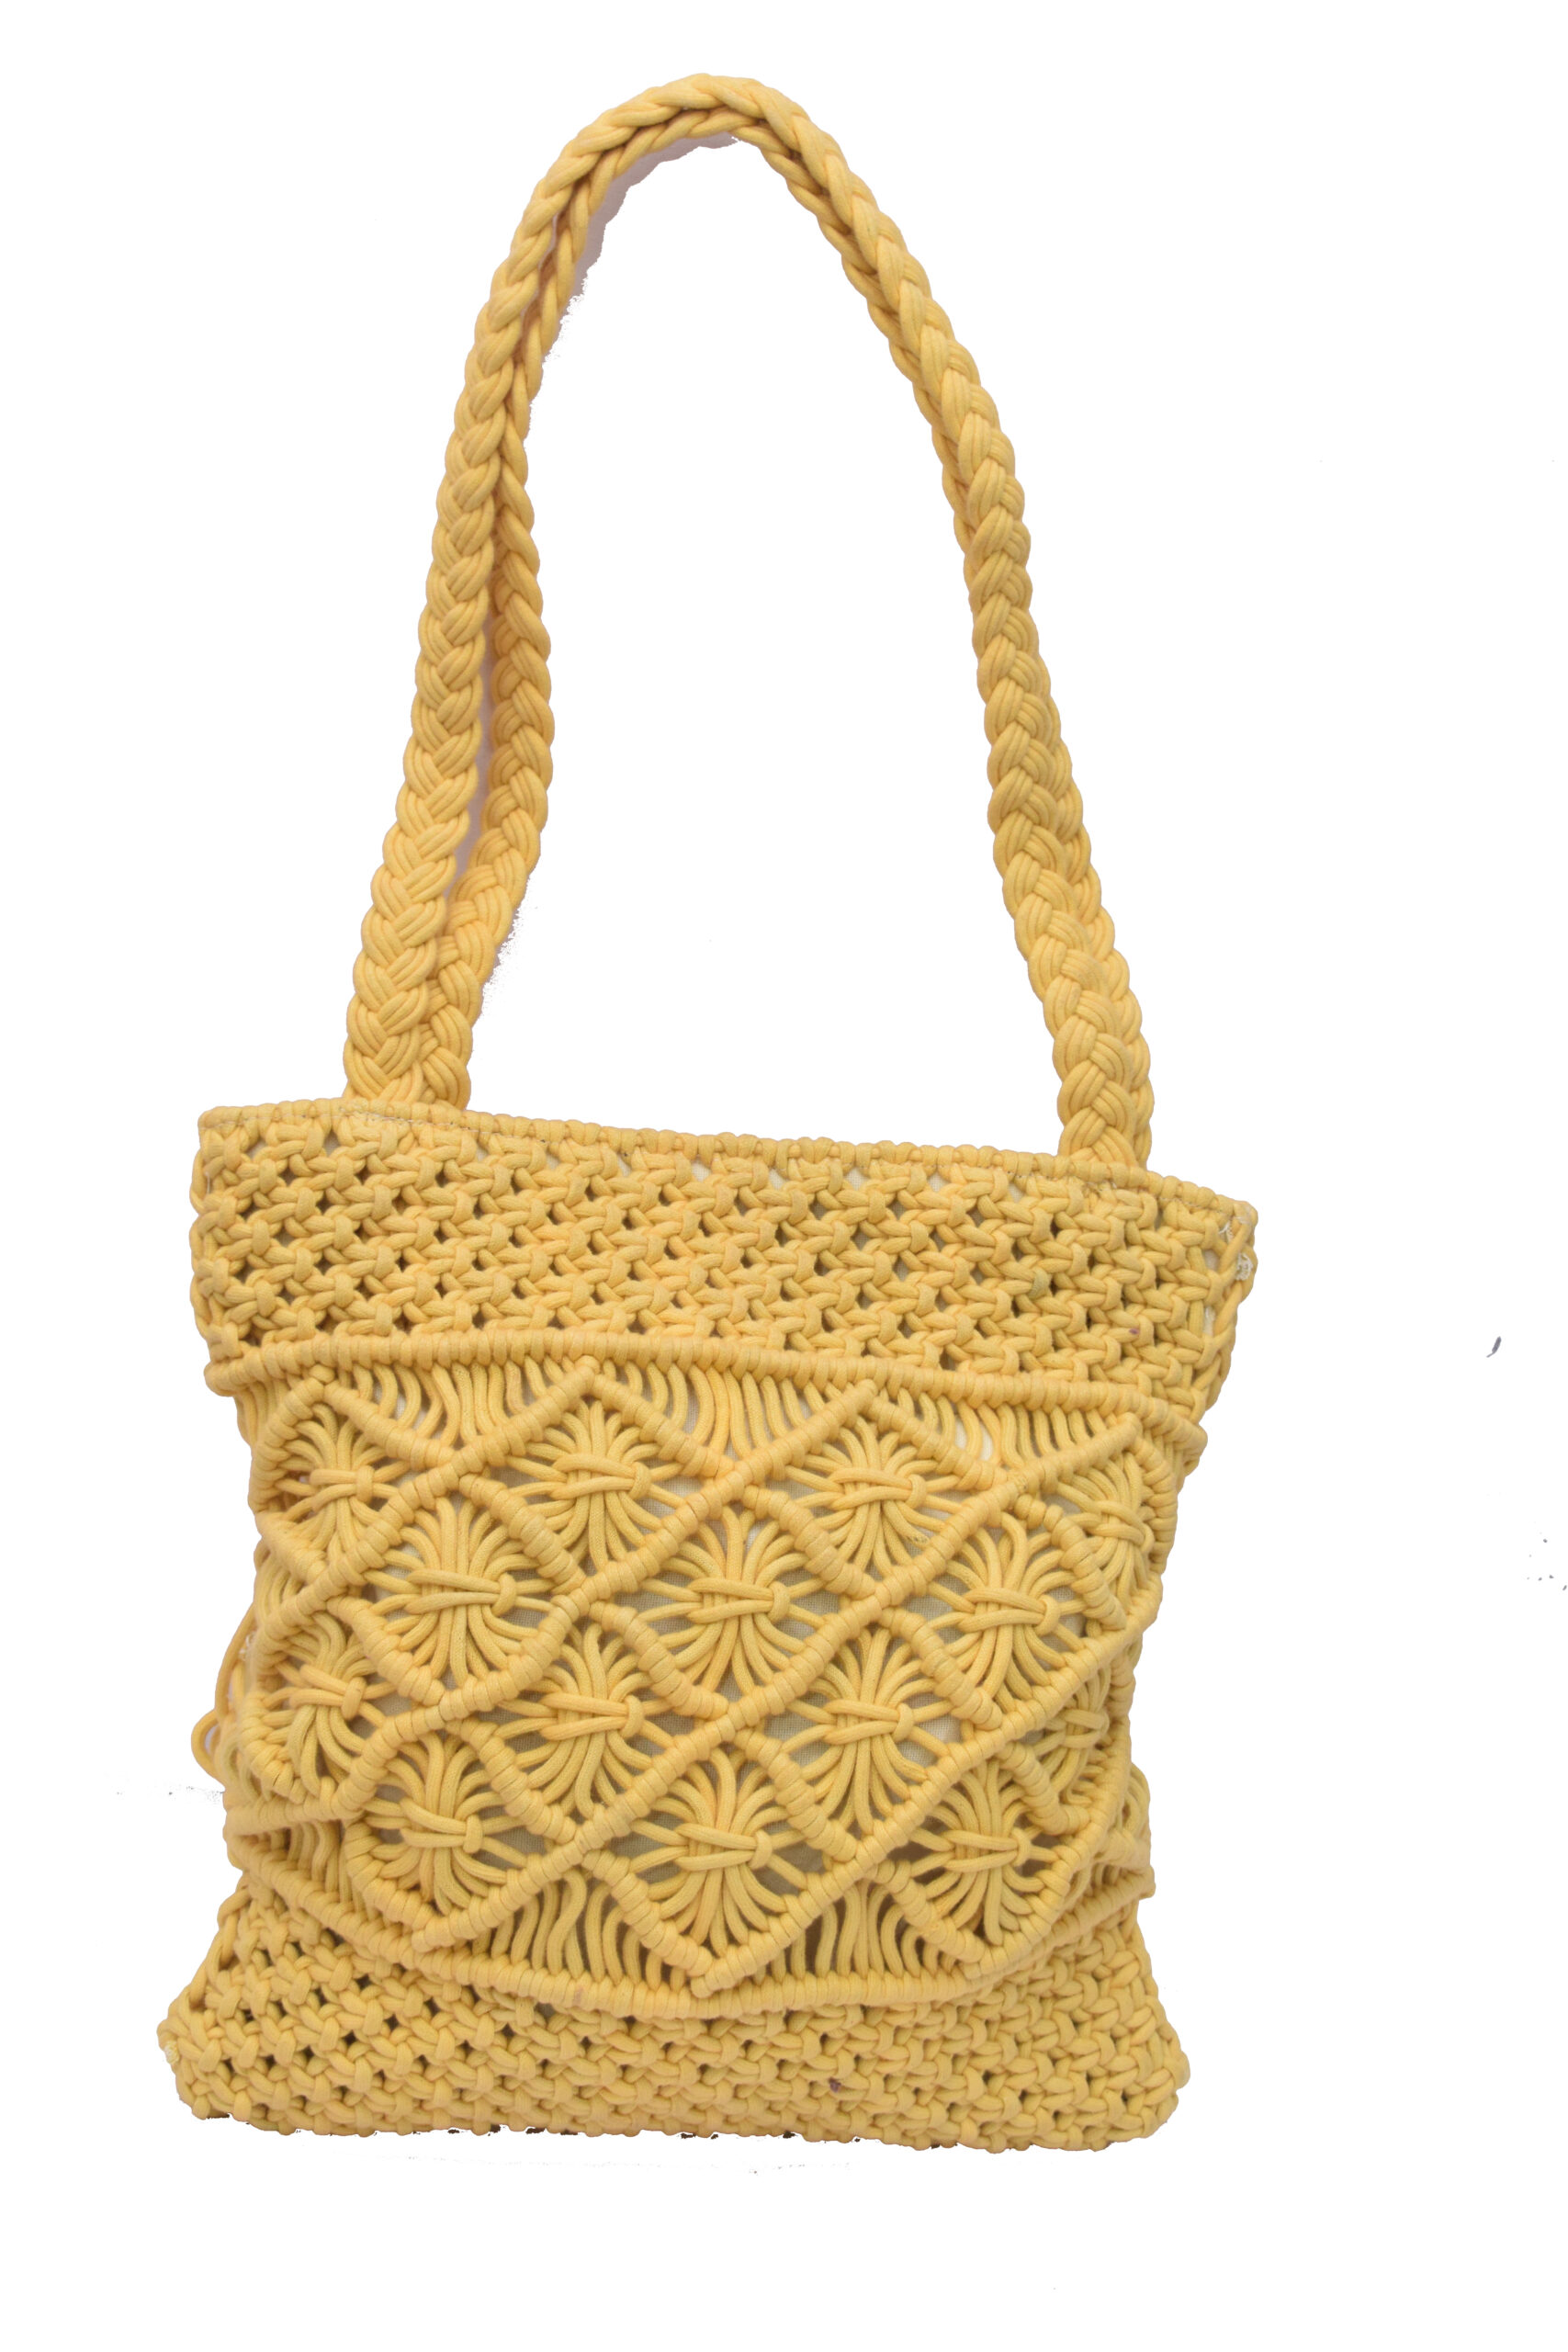 Straw Tote Bag for Women Summer, Large Straw Beach Tote Bag for Travel  Vacation, Straw Shoulder Bag with Zipper and Lining,Casual Straw Shoulder  Bags